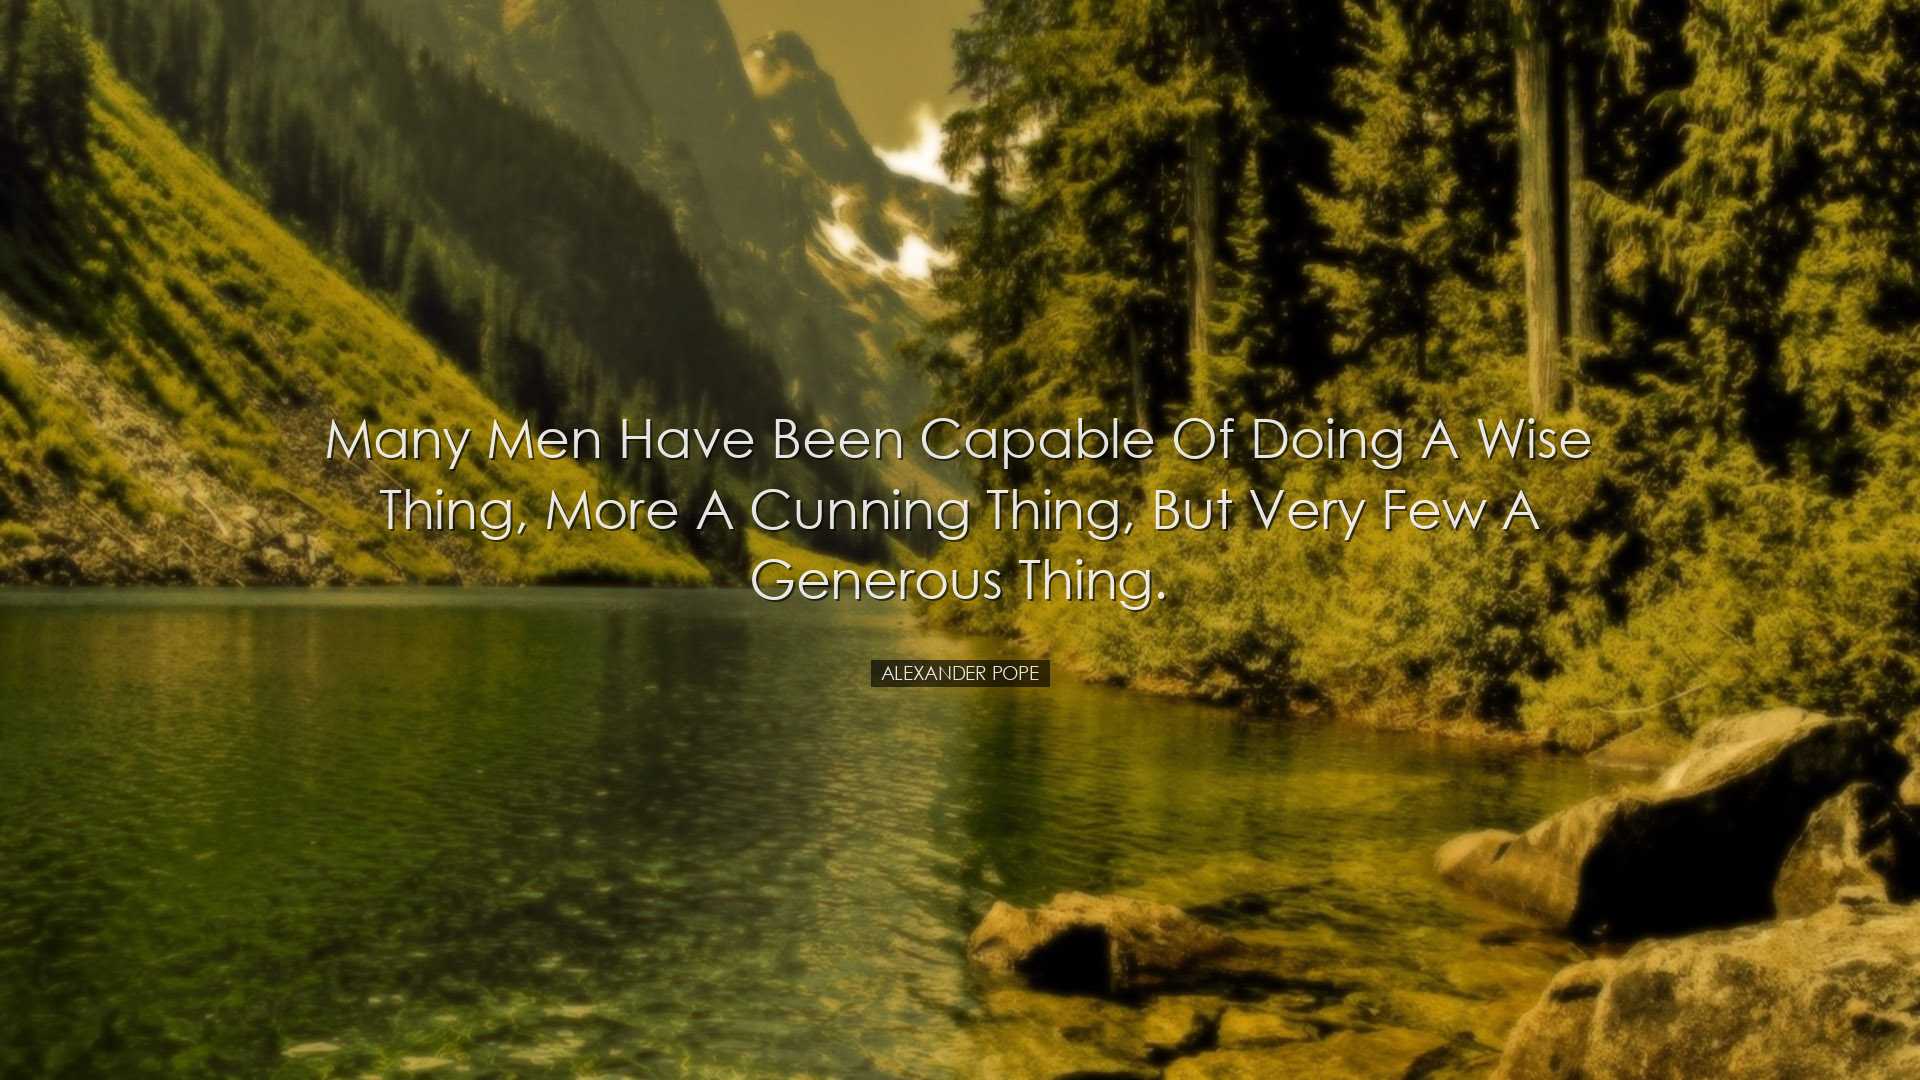 Many men have been capable of doing a wise thing, more a cunning t